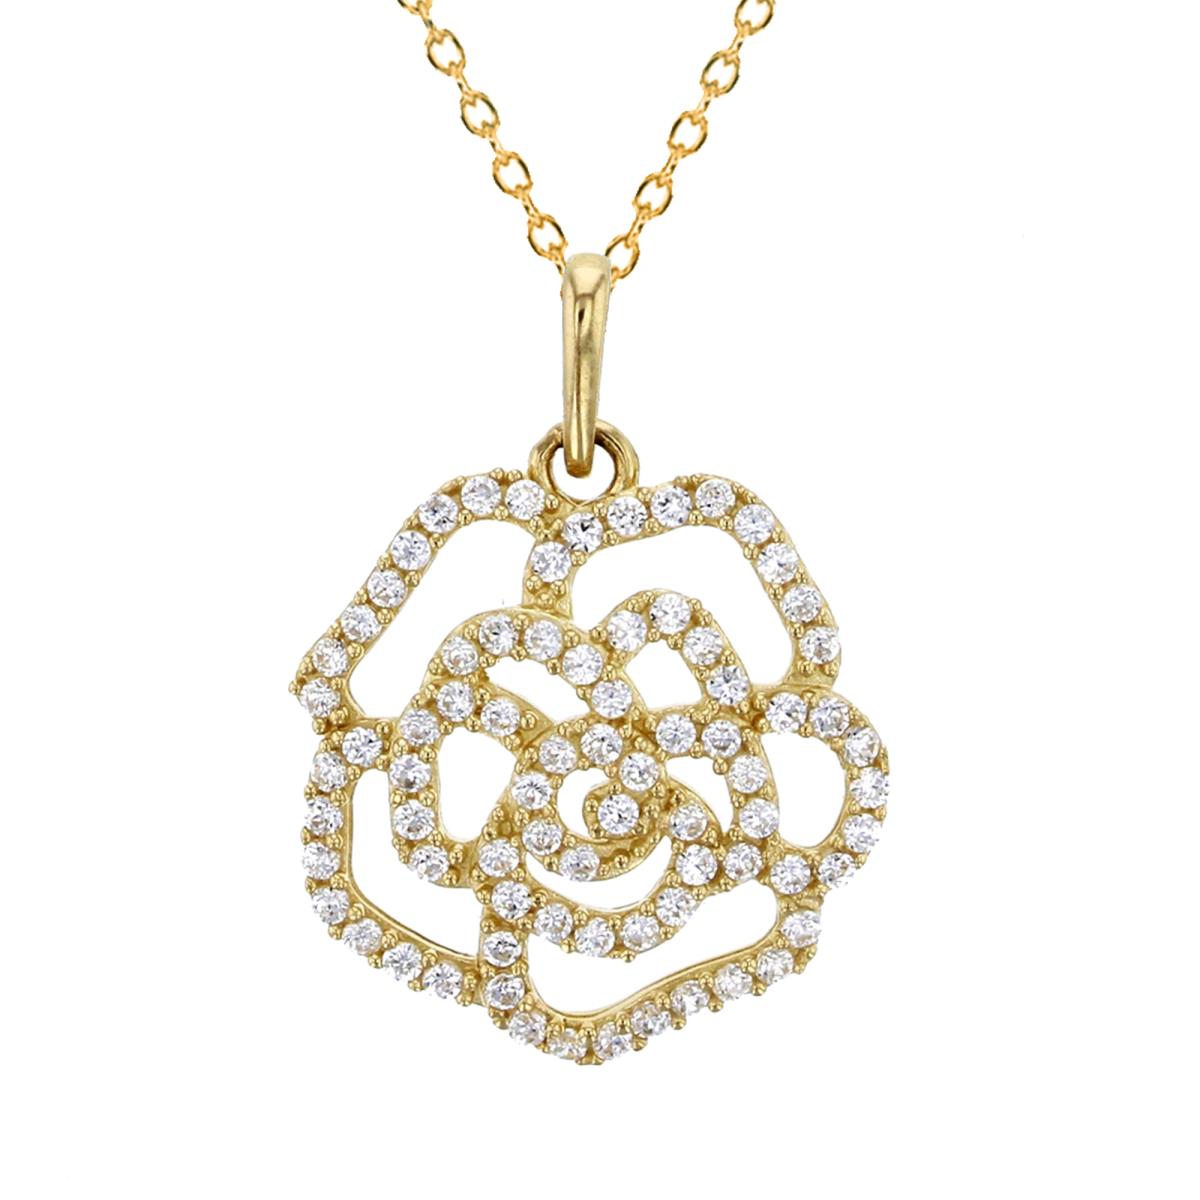 10K Yellow Gold Micropave Round CZ Filigree Rose 18" Necklace